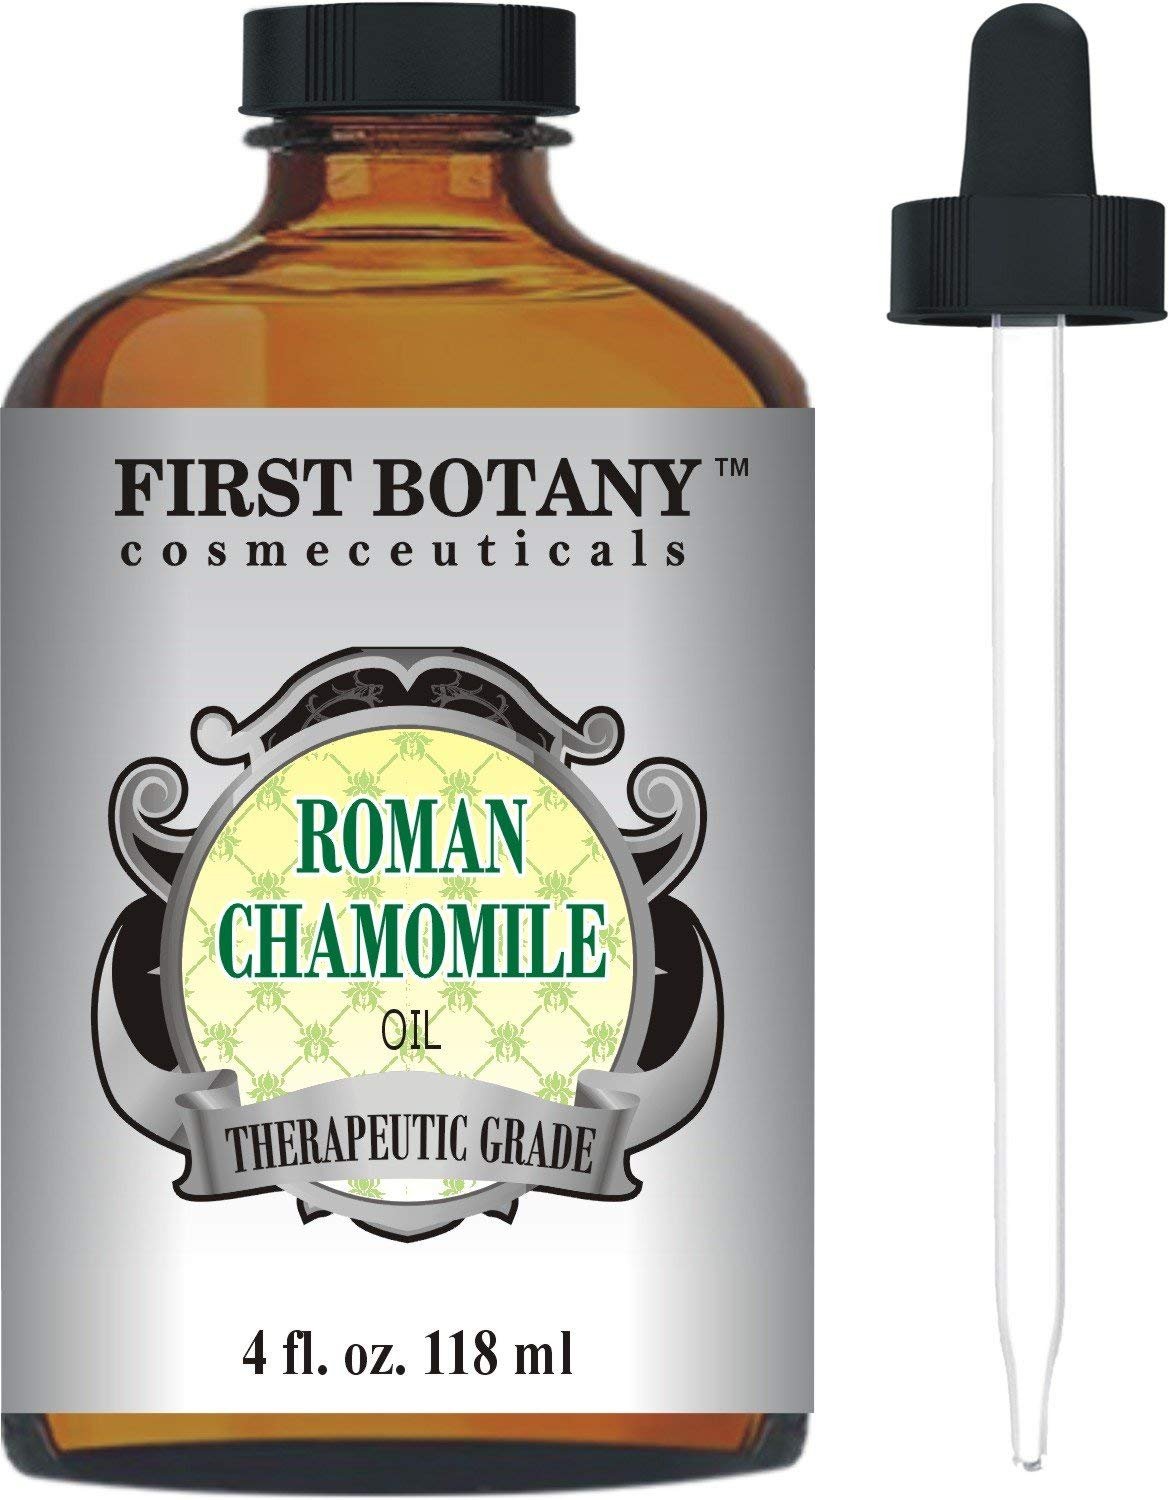 The Queen of Chamomiles: Cape Chamomile Essential Oil  Miracle Botanicals  Blog– Miracle Botanicals Essential Oils